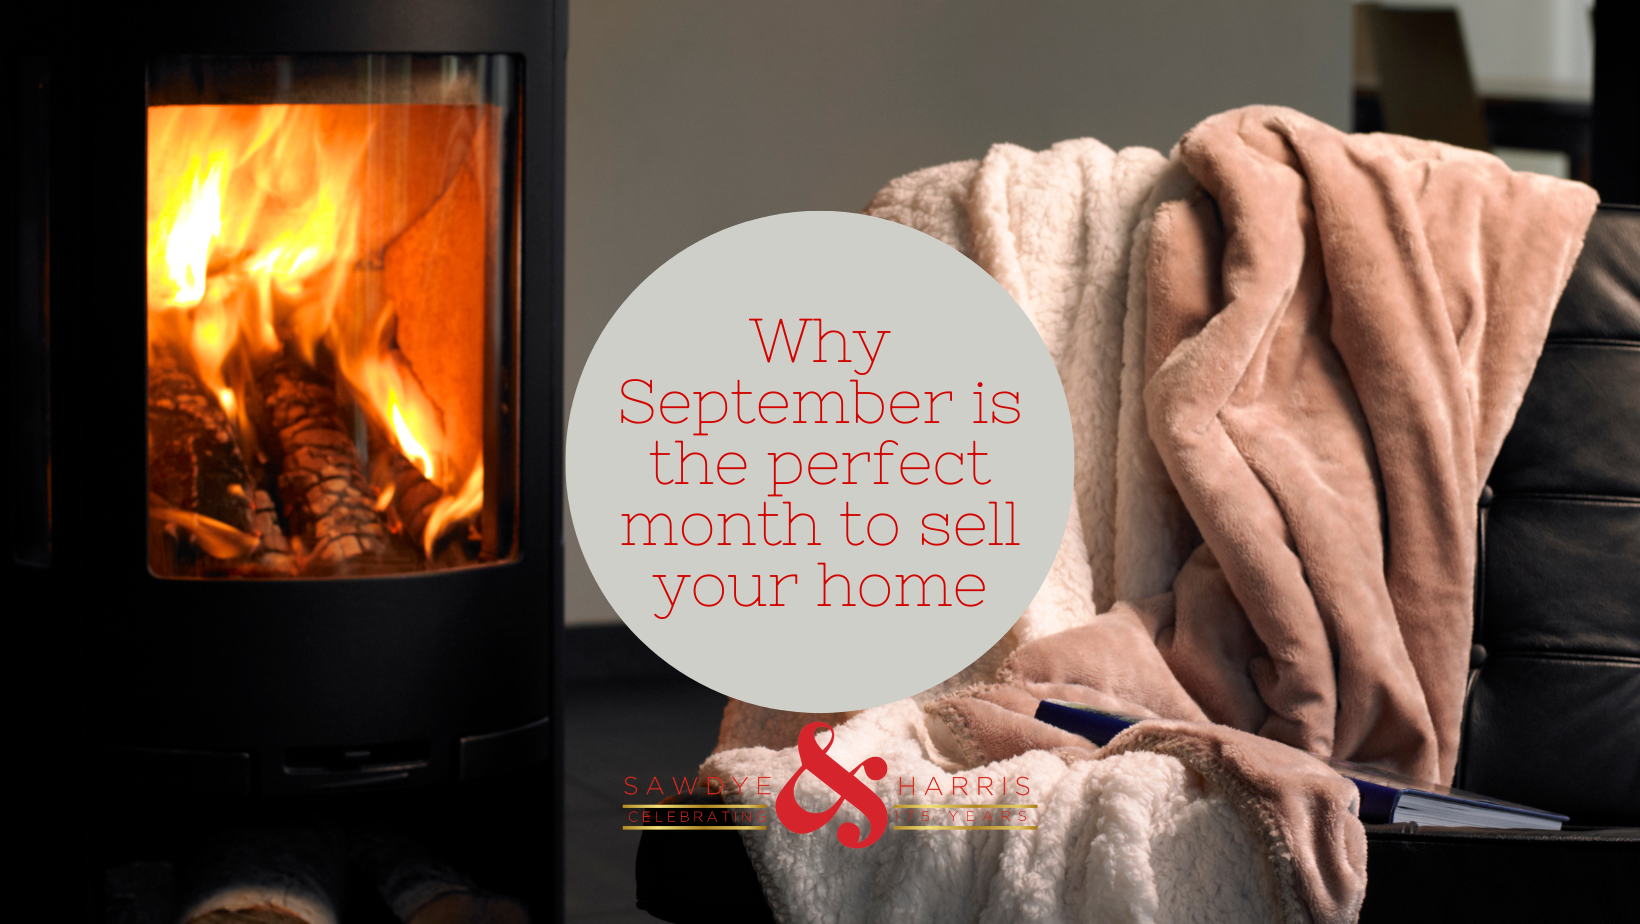 WHY IS SEPTEMBER THE PERFECT MONTH TO SELL YOUR HOME?